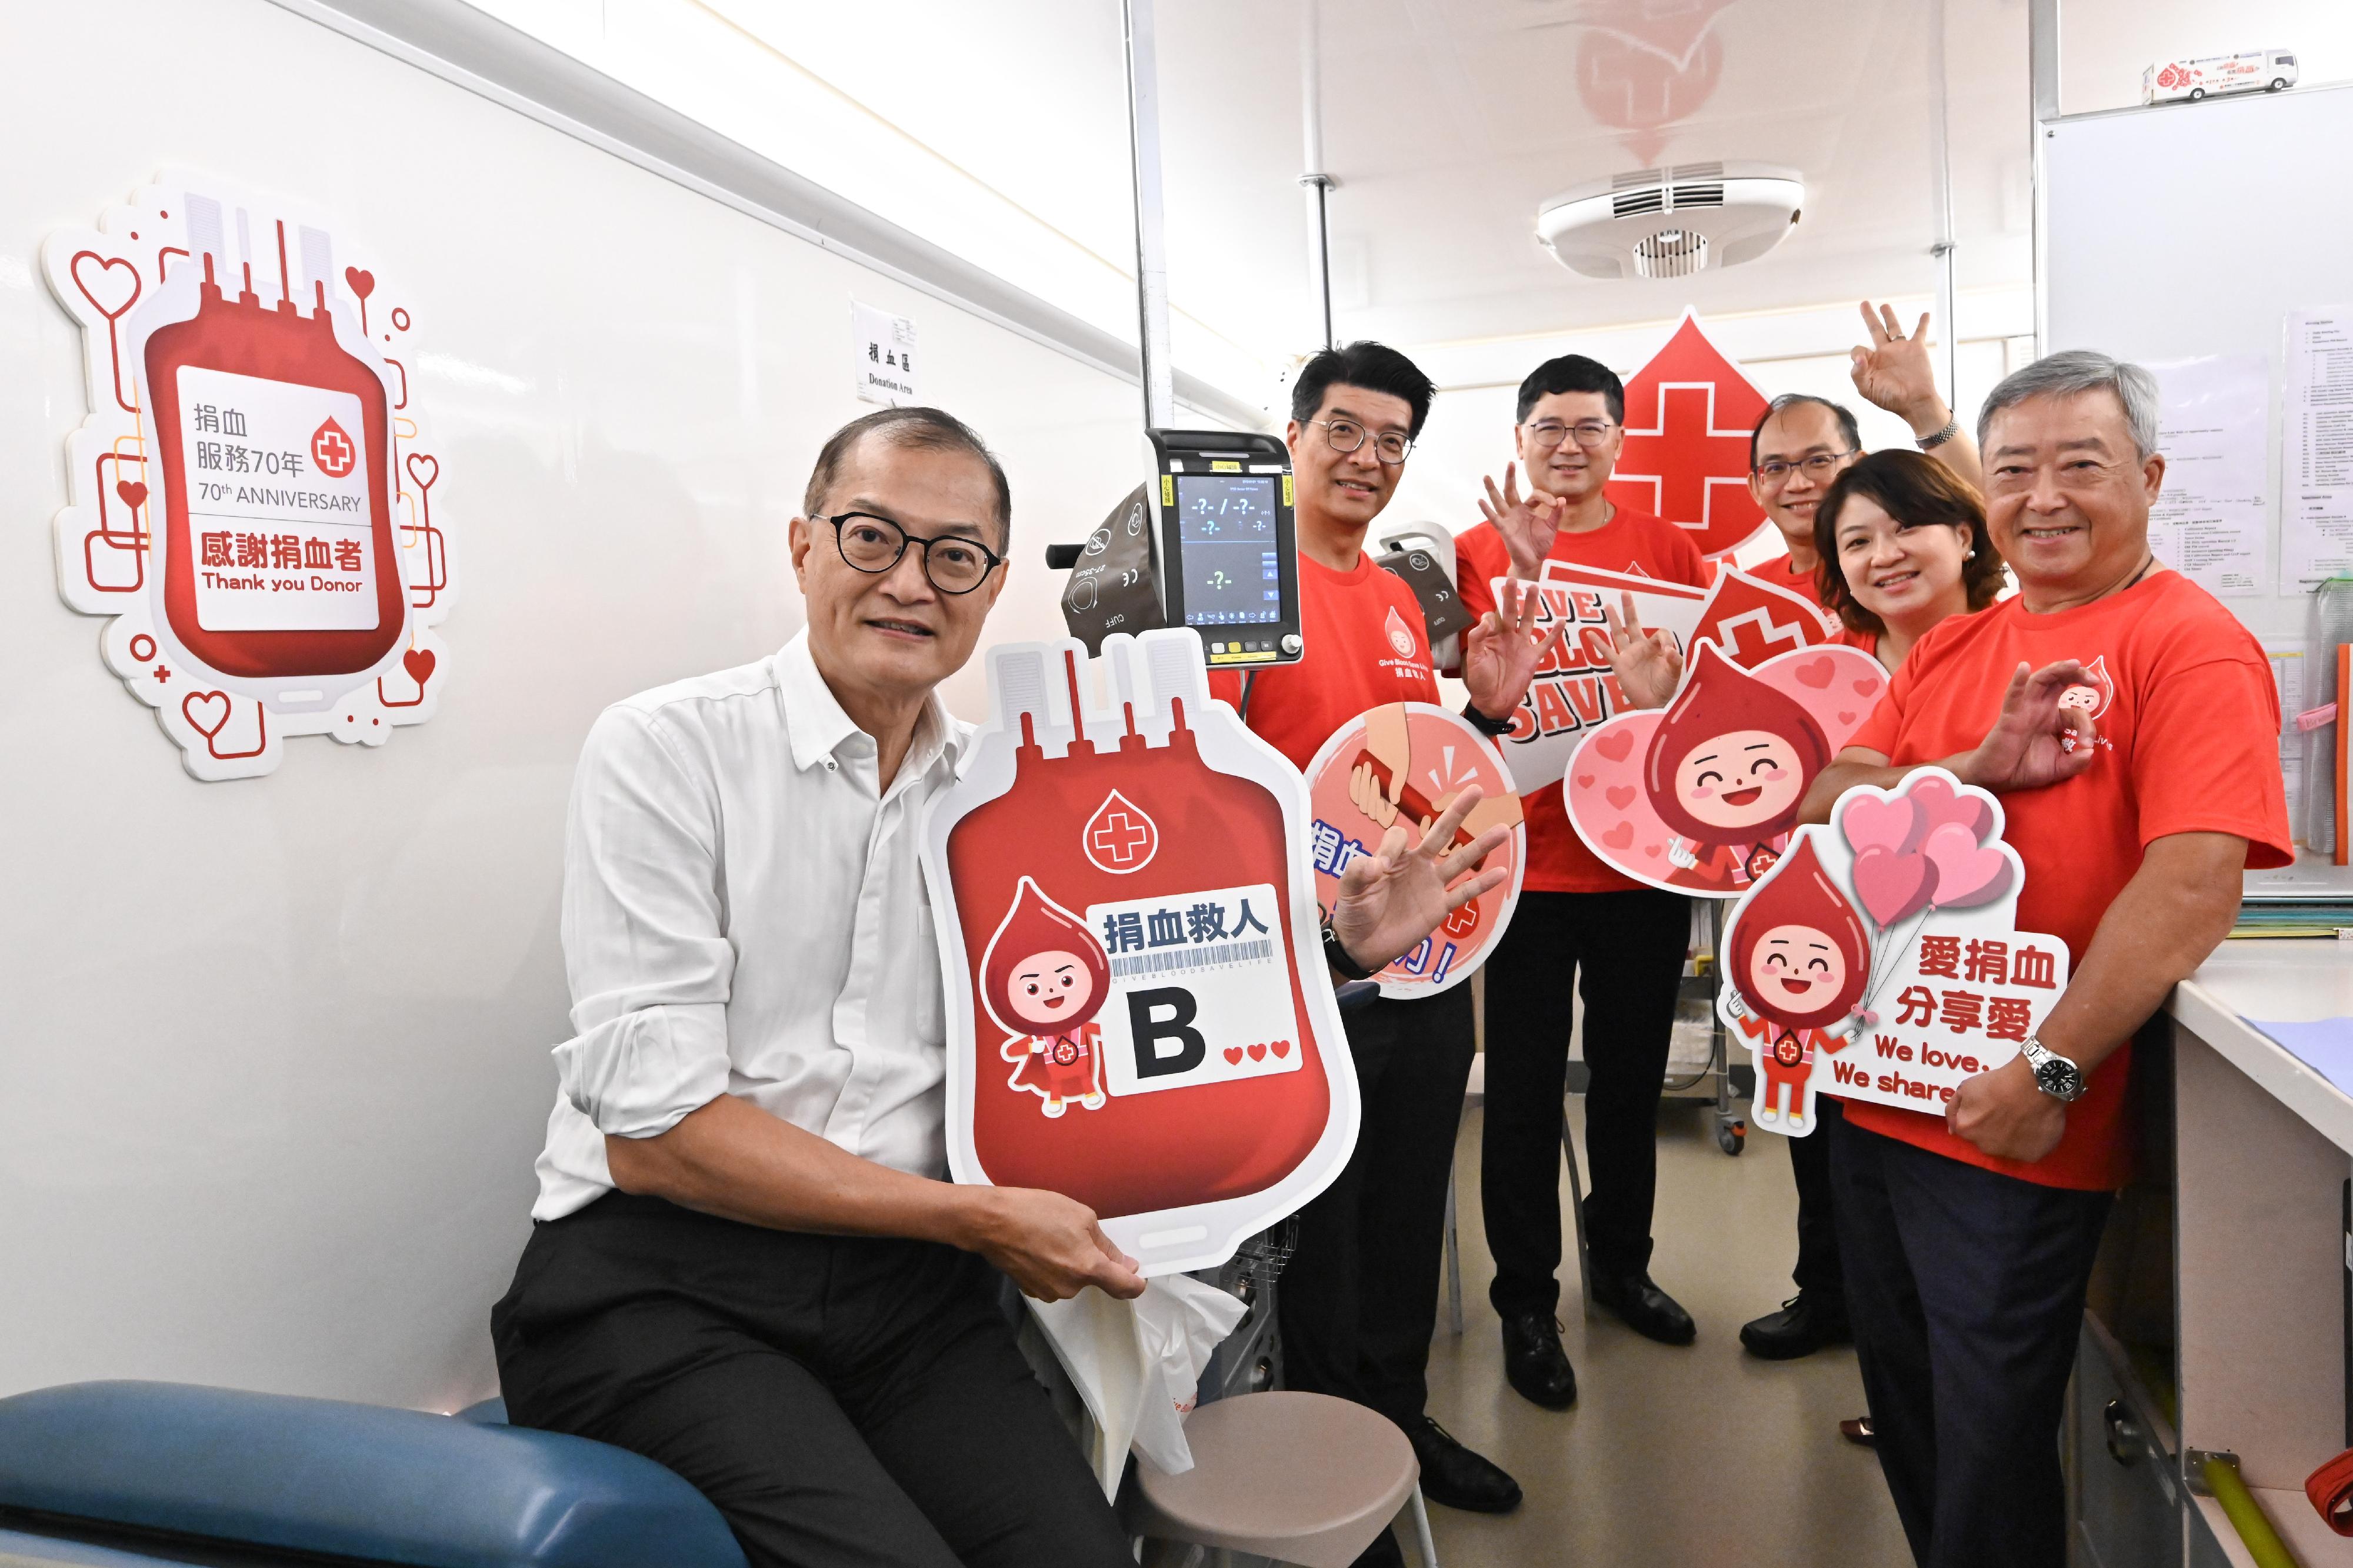 The Secretary for Health, Professor Lo Chung-mau (first left); the Under Secretary for Health, Dr Libby Lee (second right); the Commissioner for Primary Healthcare, Dr Pang Fei-chau (second left); and the Chief Executive of the Hospital Authority, Dr Tony Ko (third left), donated blood on the mobile blood donation vehicle of the Hong Kong Red Cross Blood Transfusion Service parked at the Central Government Offices today (August 14) and appealed to members of the public, including government personnel, to take the initiative to donate blood.